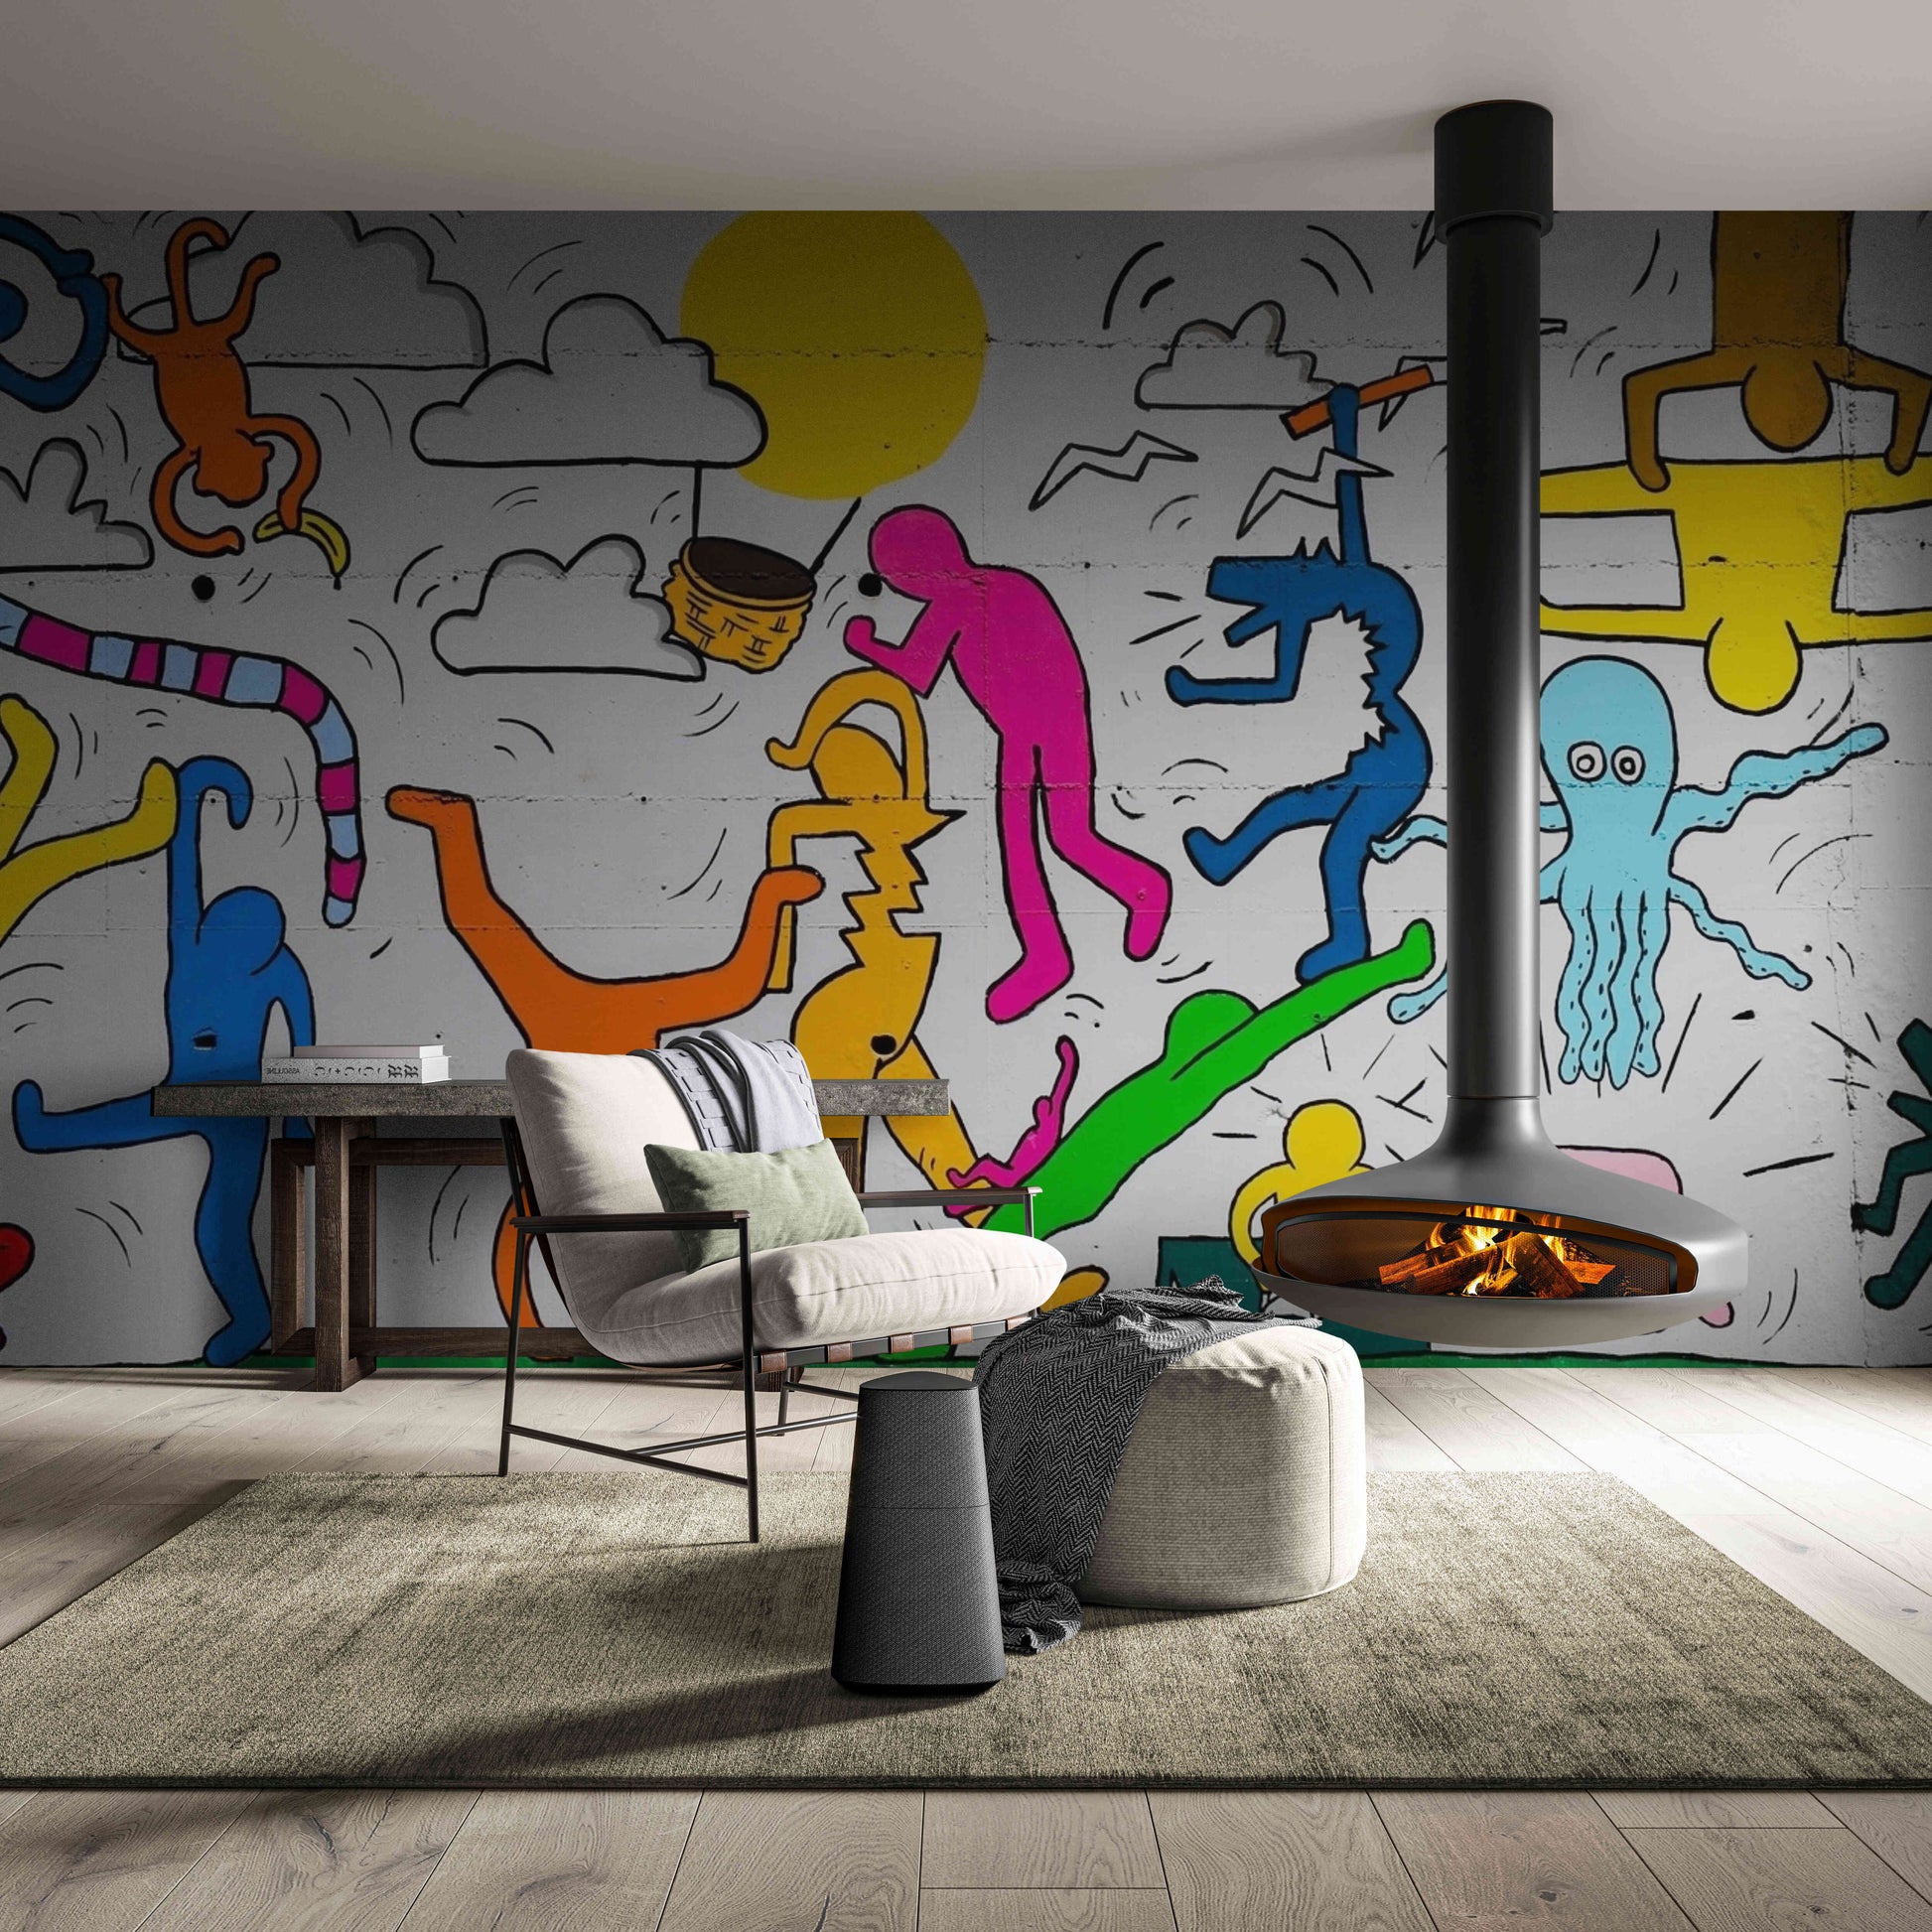 Epic superhero showdown captured in vibrant graffiti, turning any room into a scene straight out of a comic book.